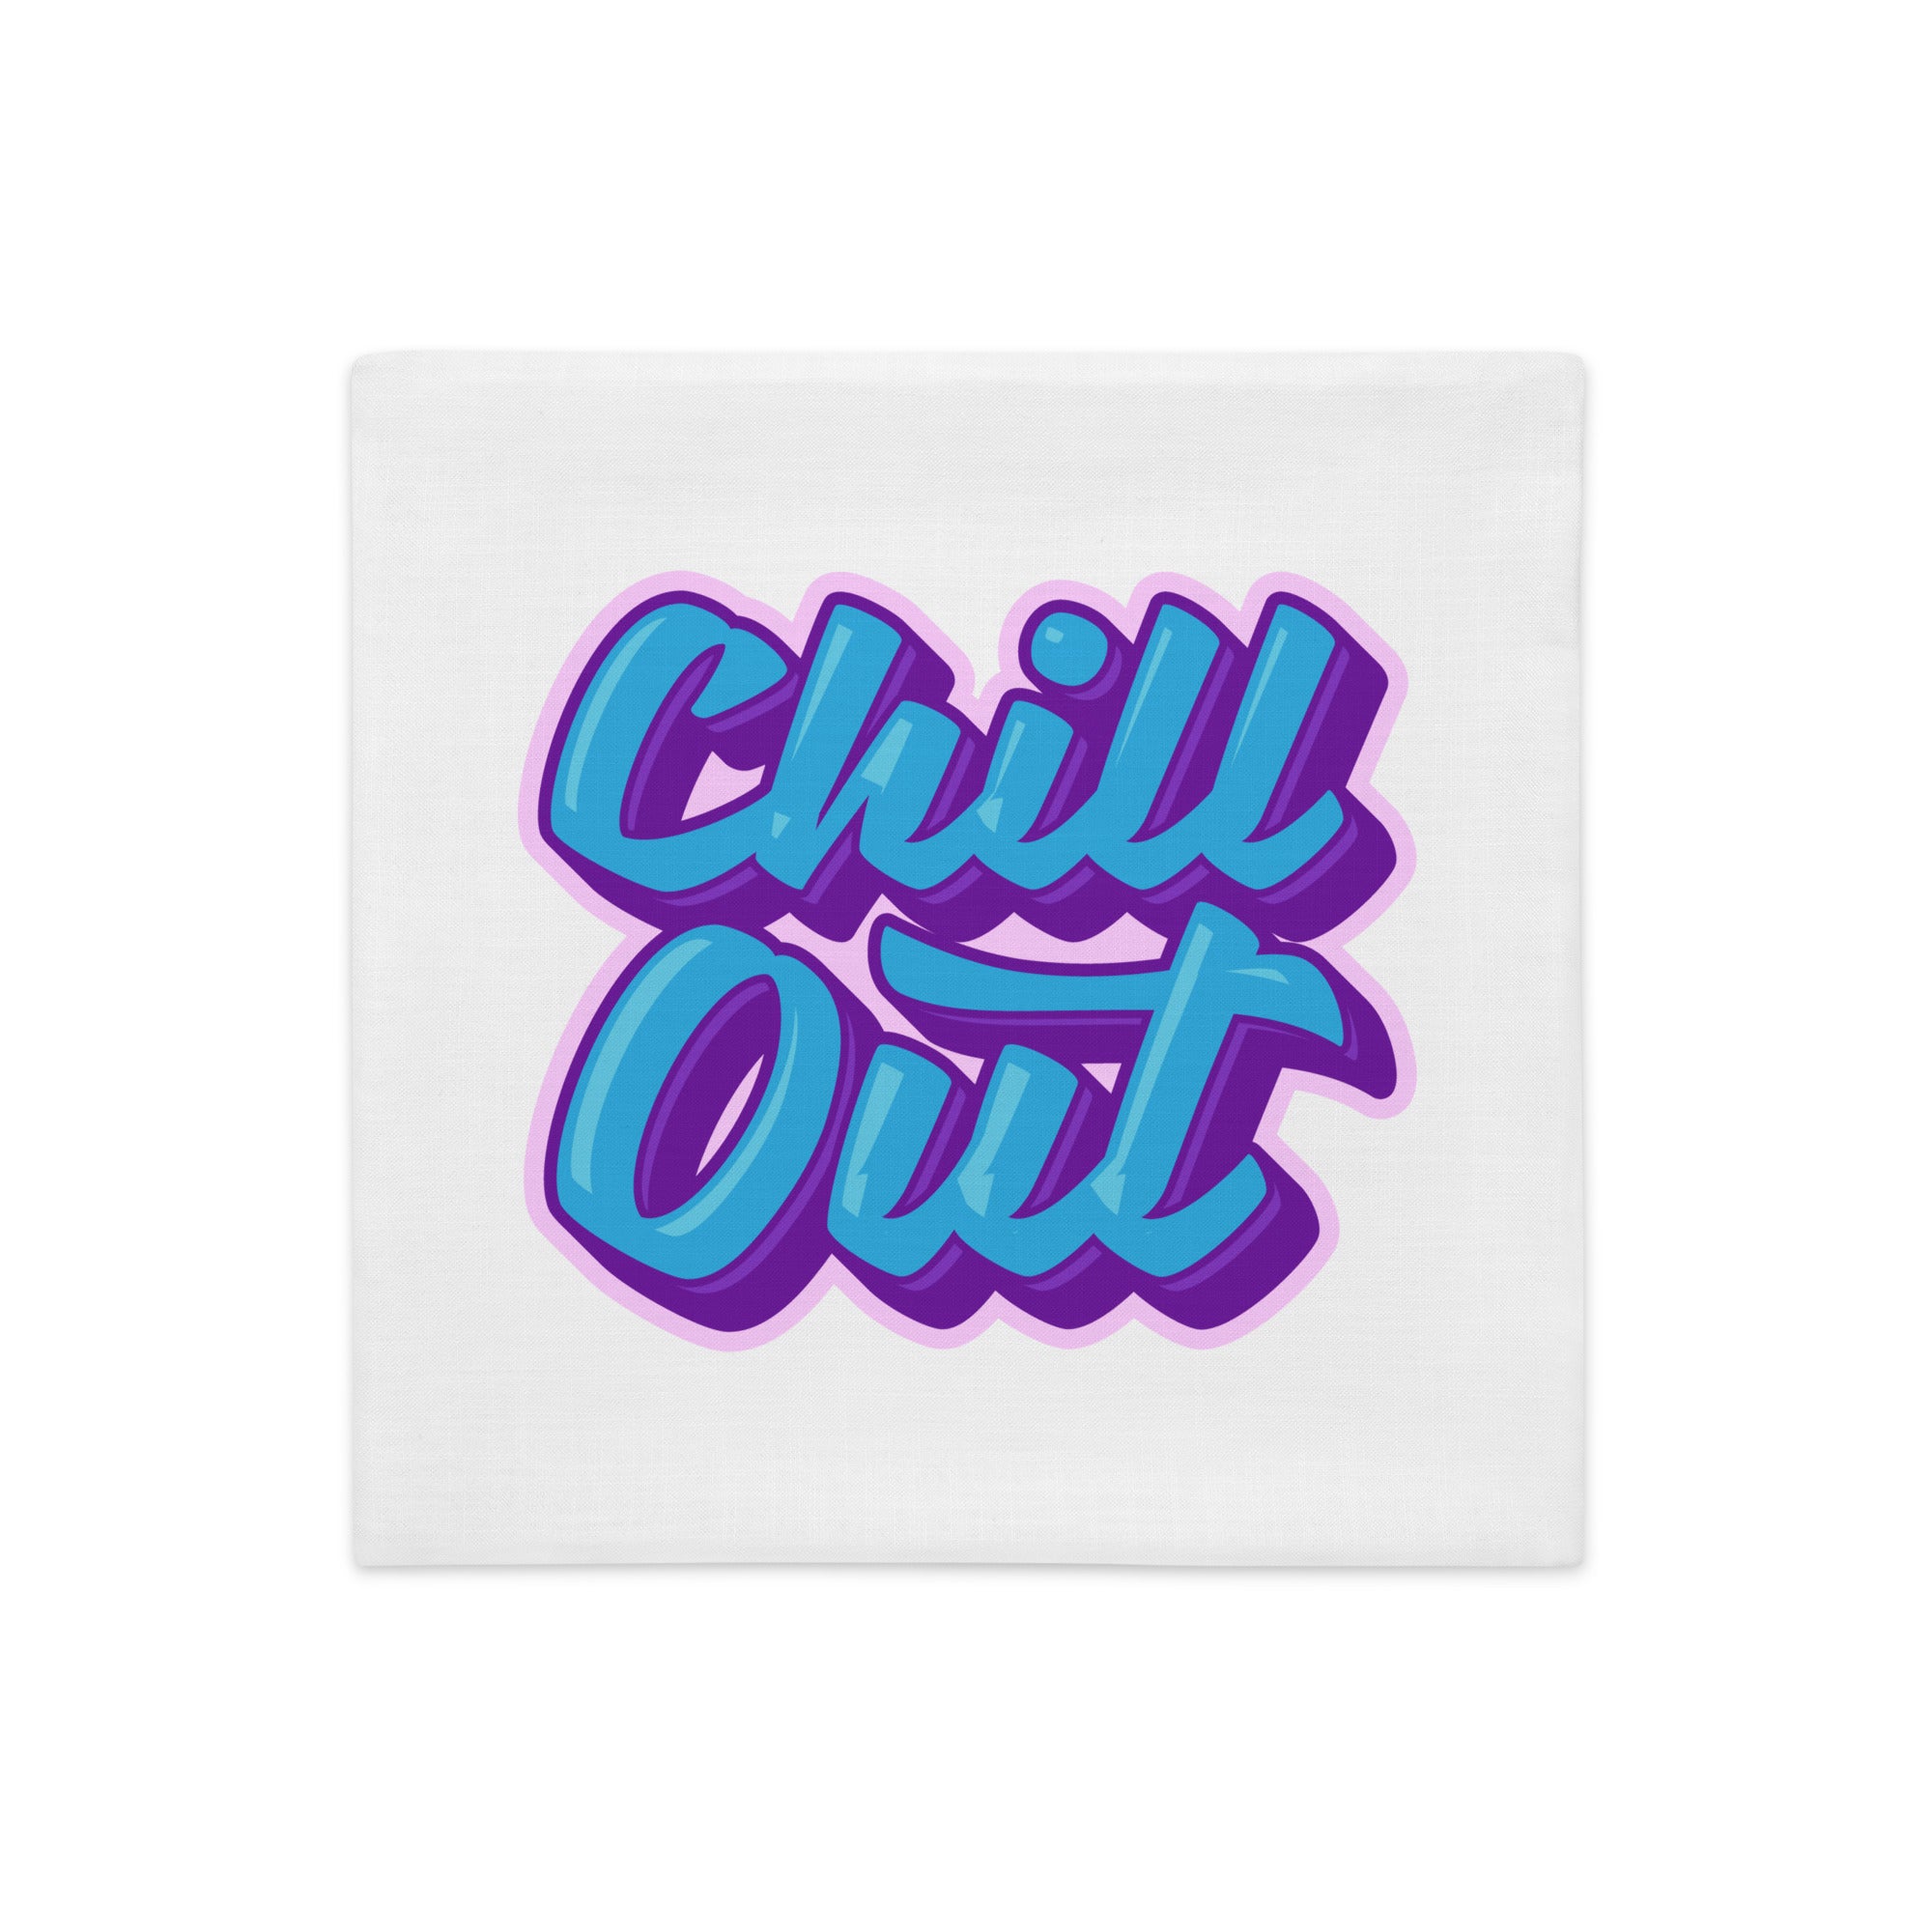 Chill Out - Premium Pillow Case